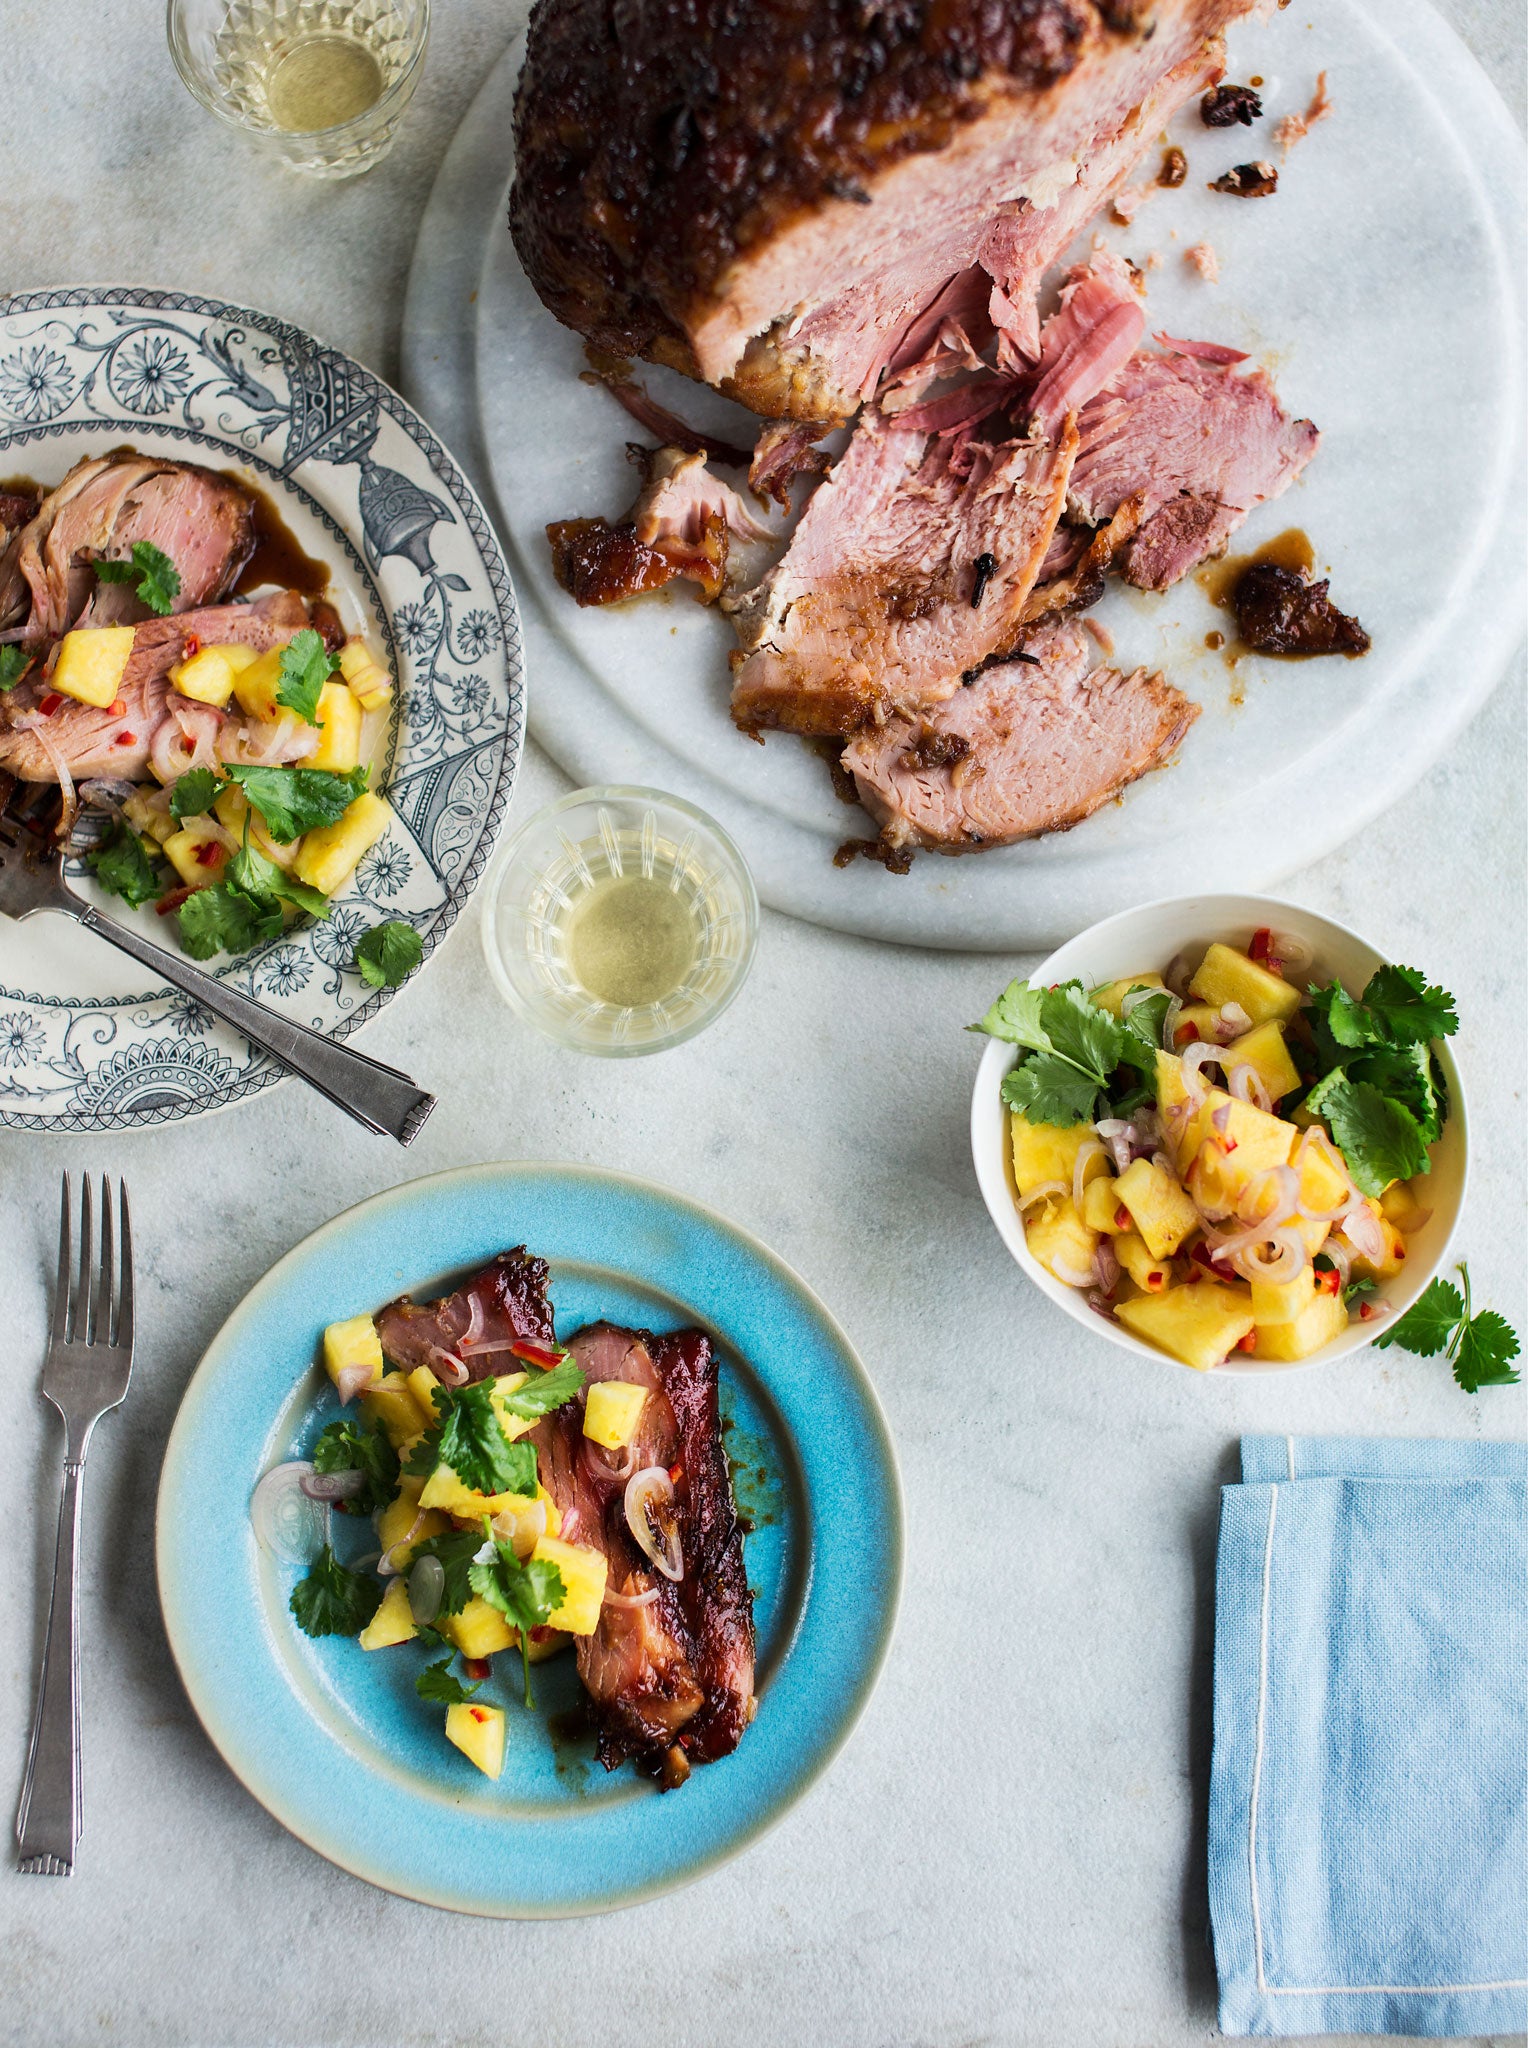 Spice-glazed gammon with a pineapple relish